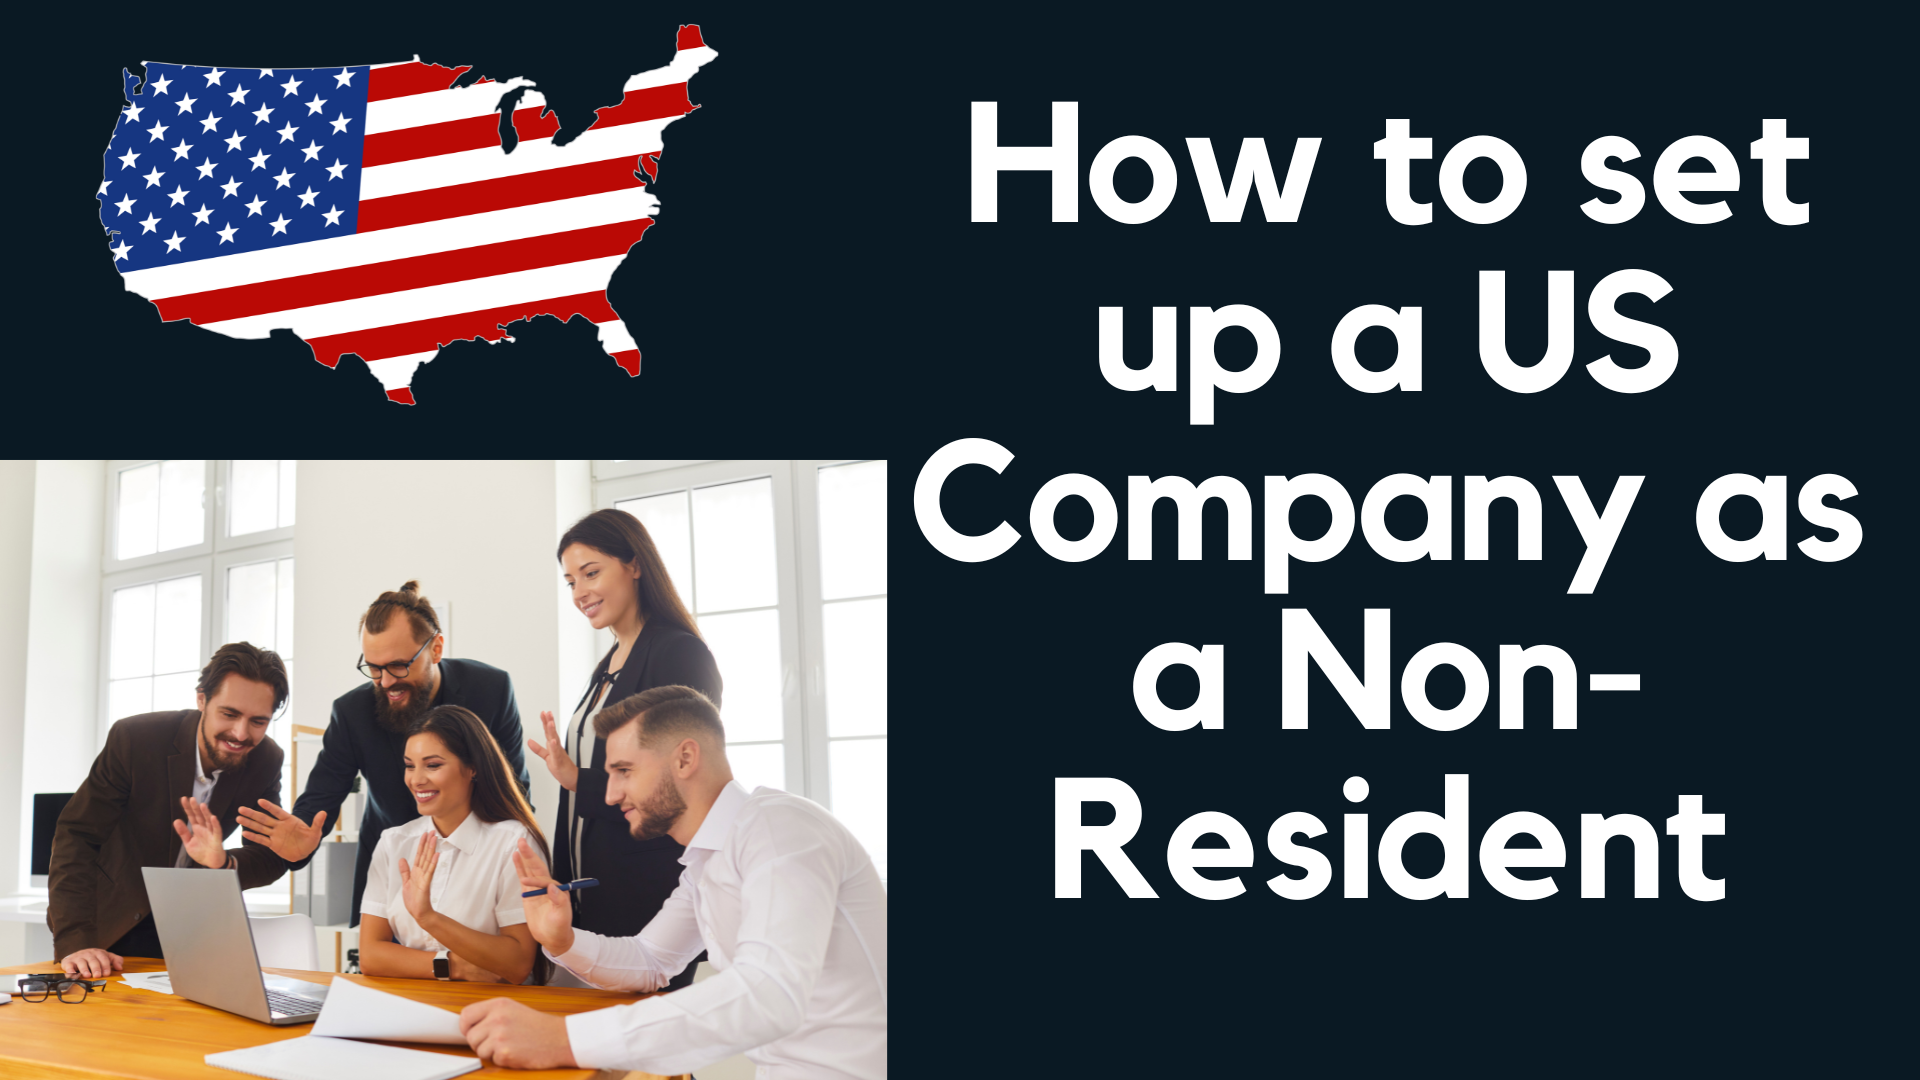 How to set up a US Company as a Non-Resident